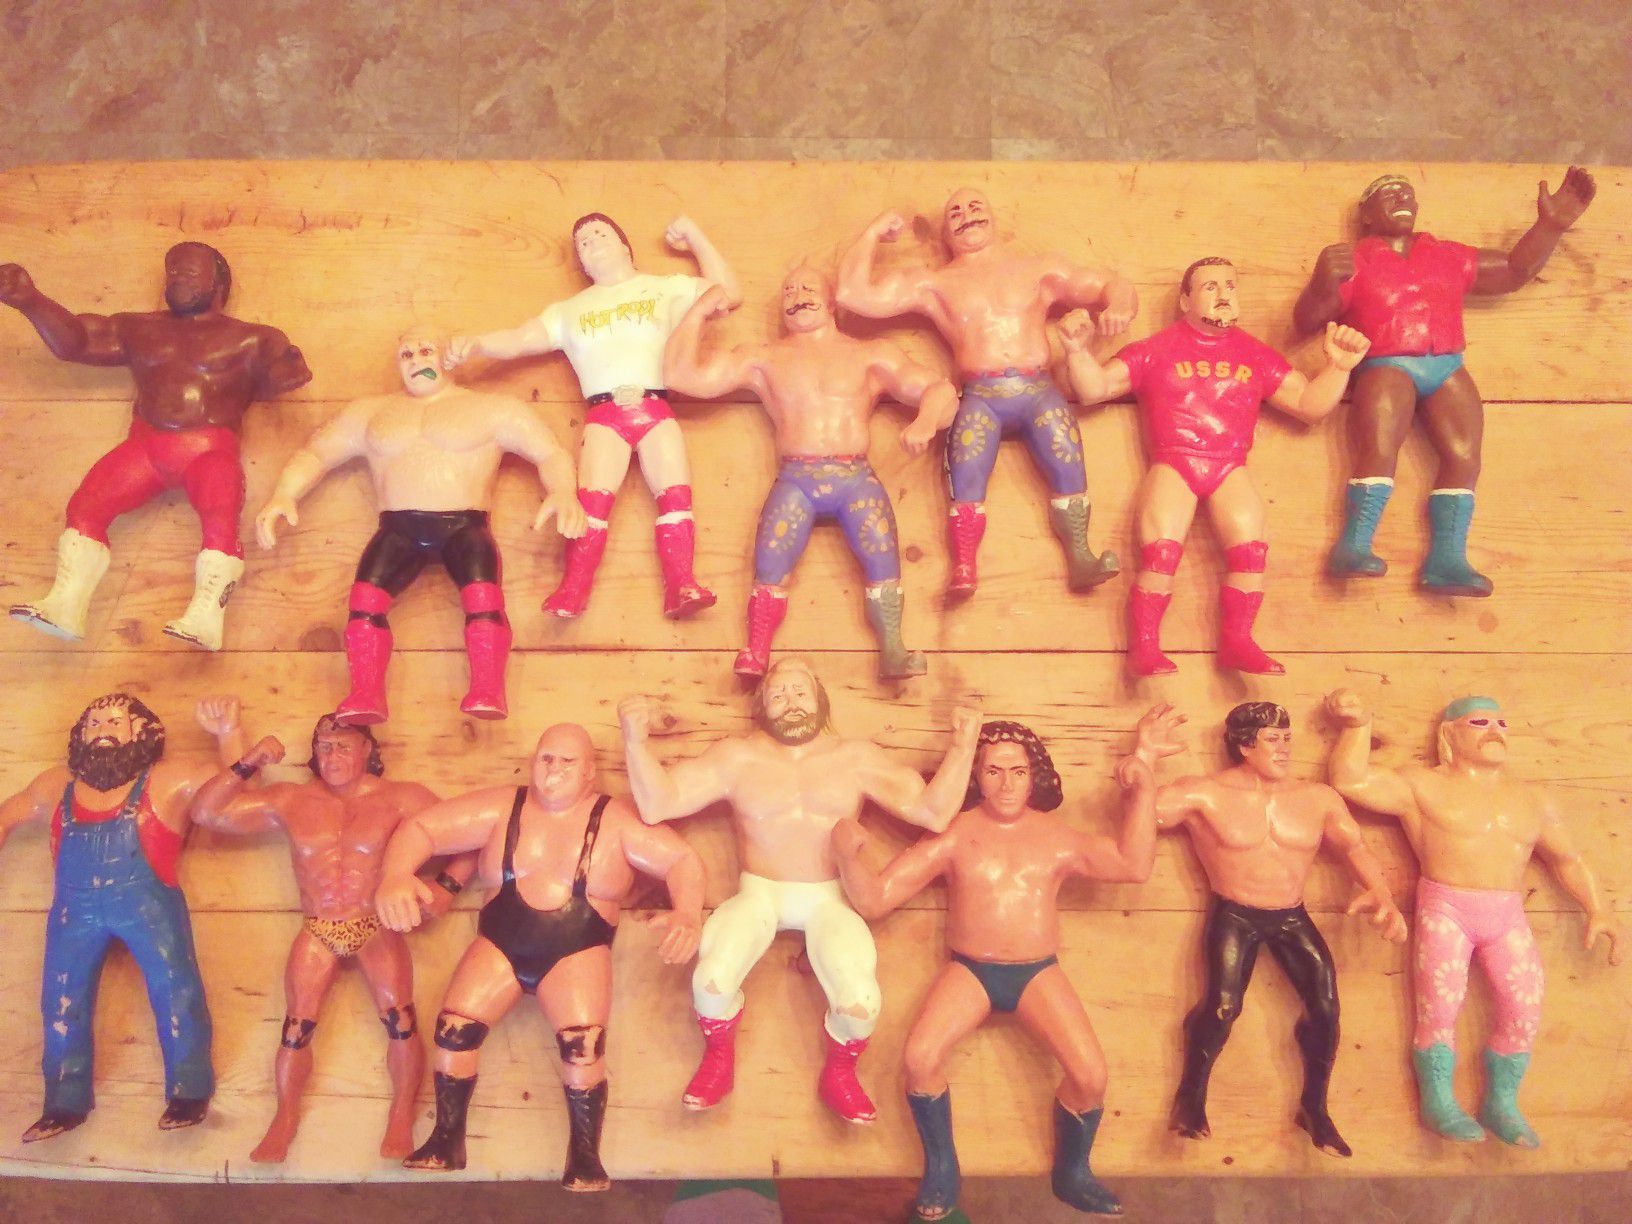 WWF 1980s rubber action figures